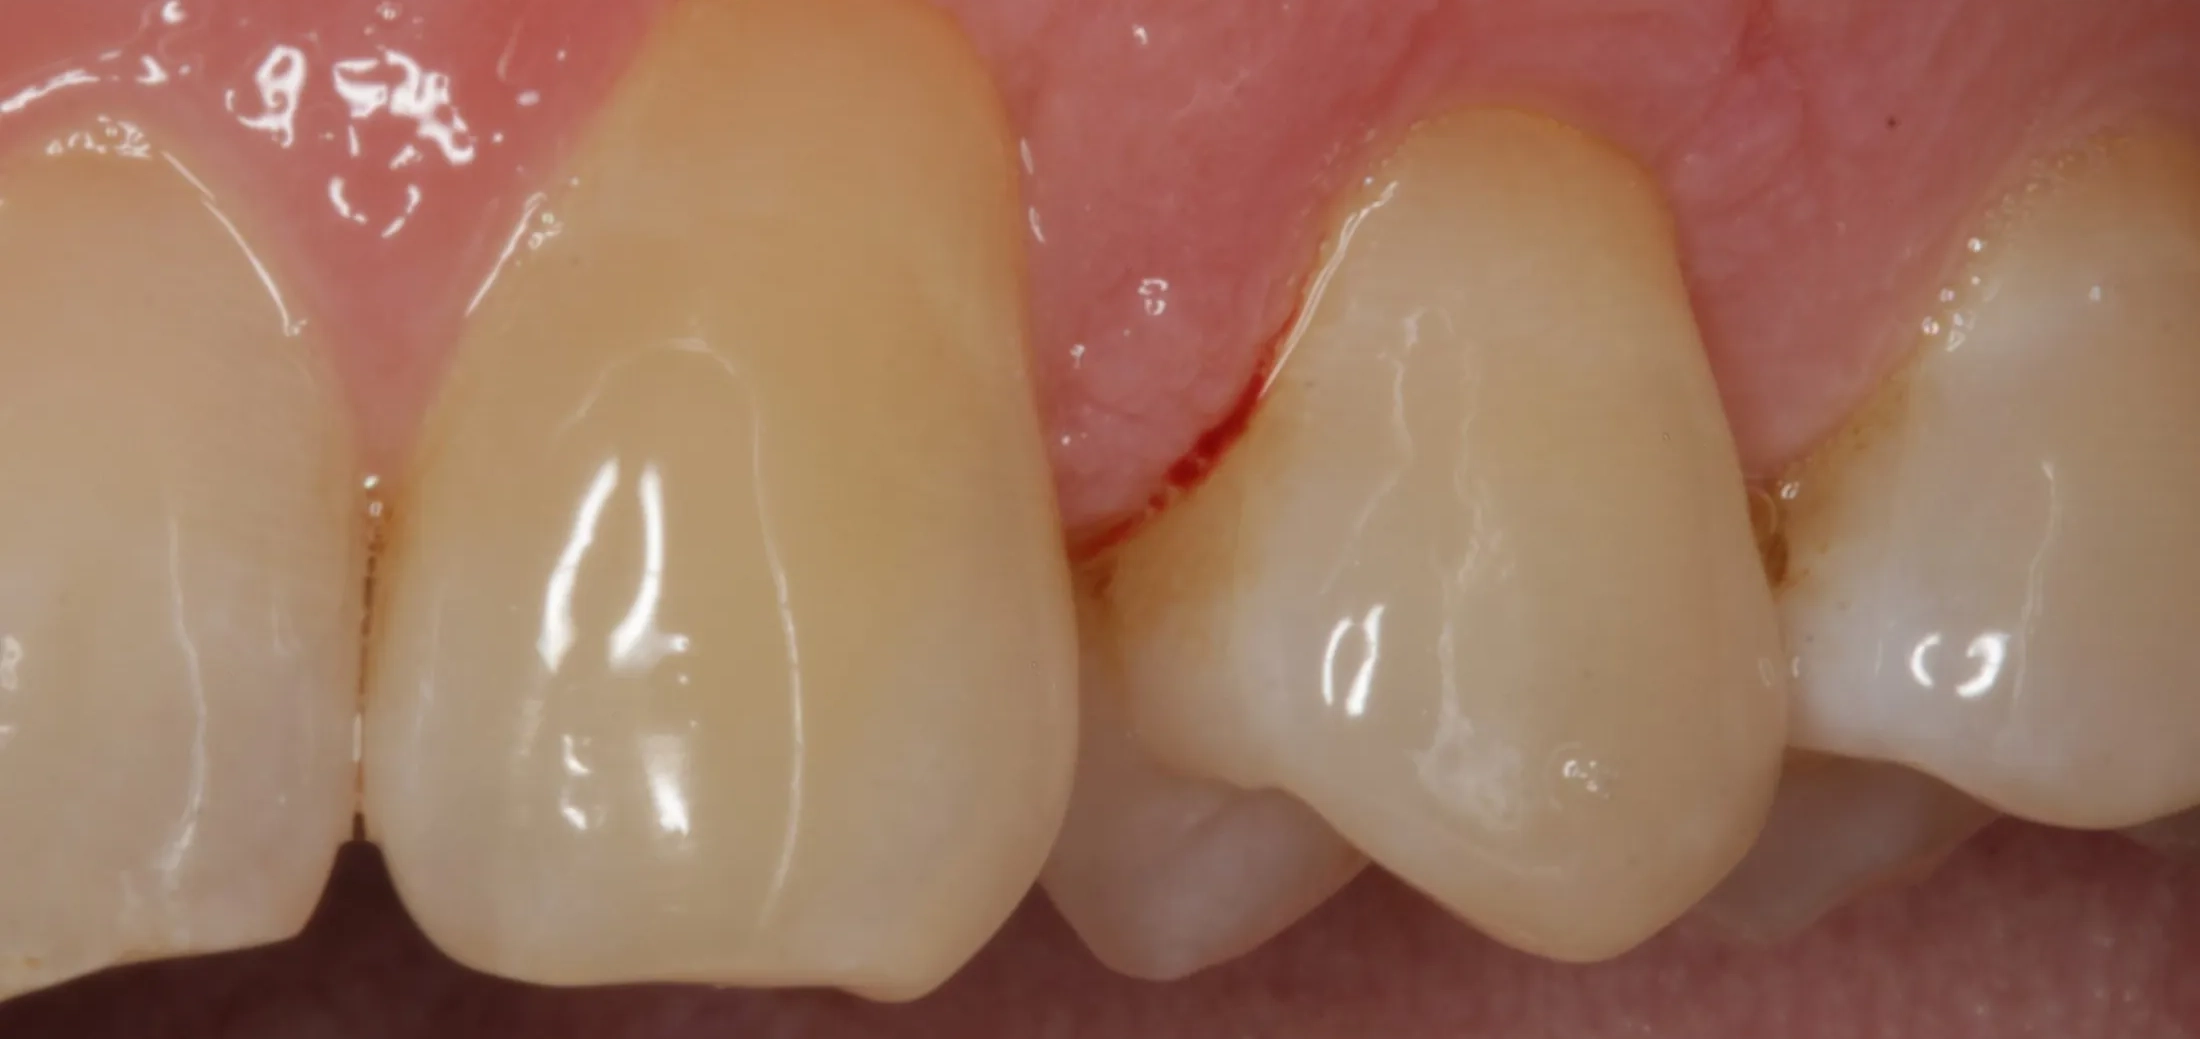 Healthy and restored gums after completion of gum grafting.